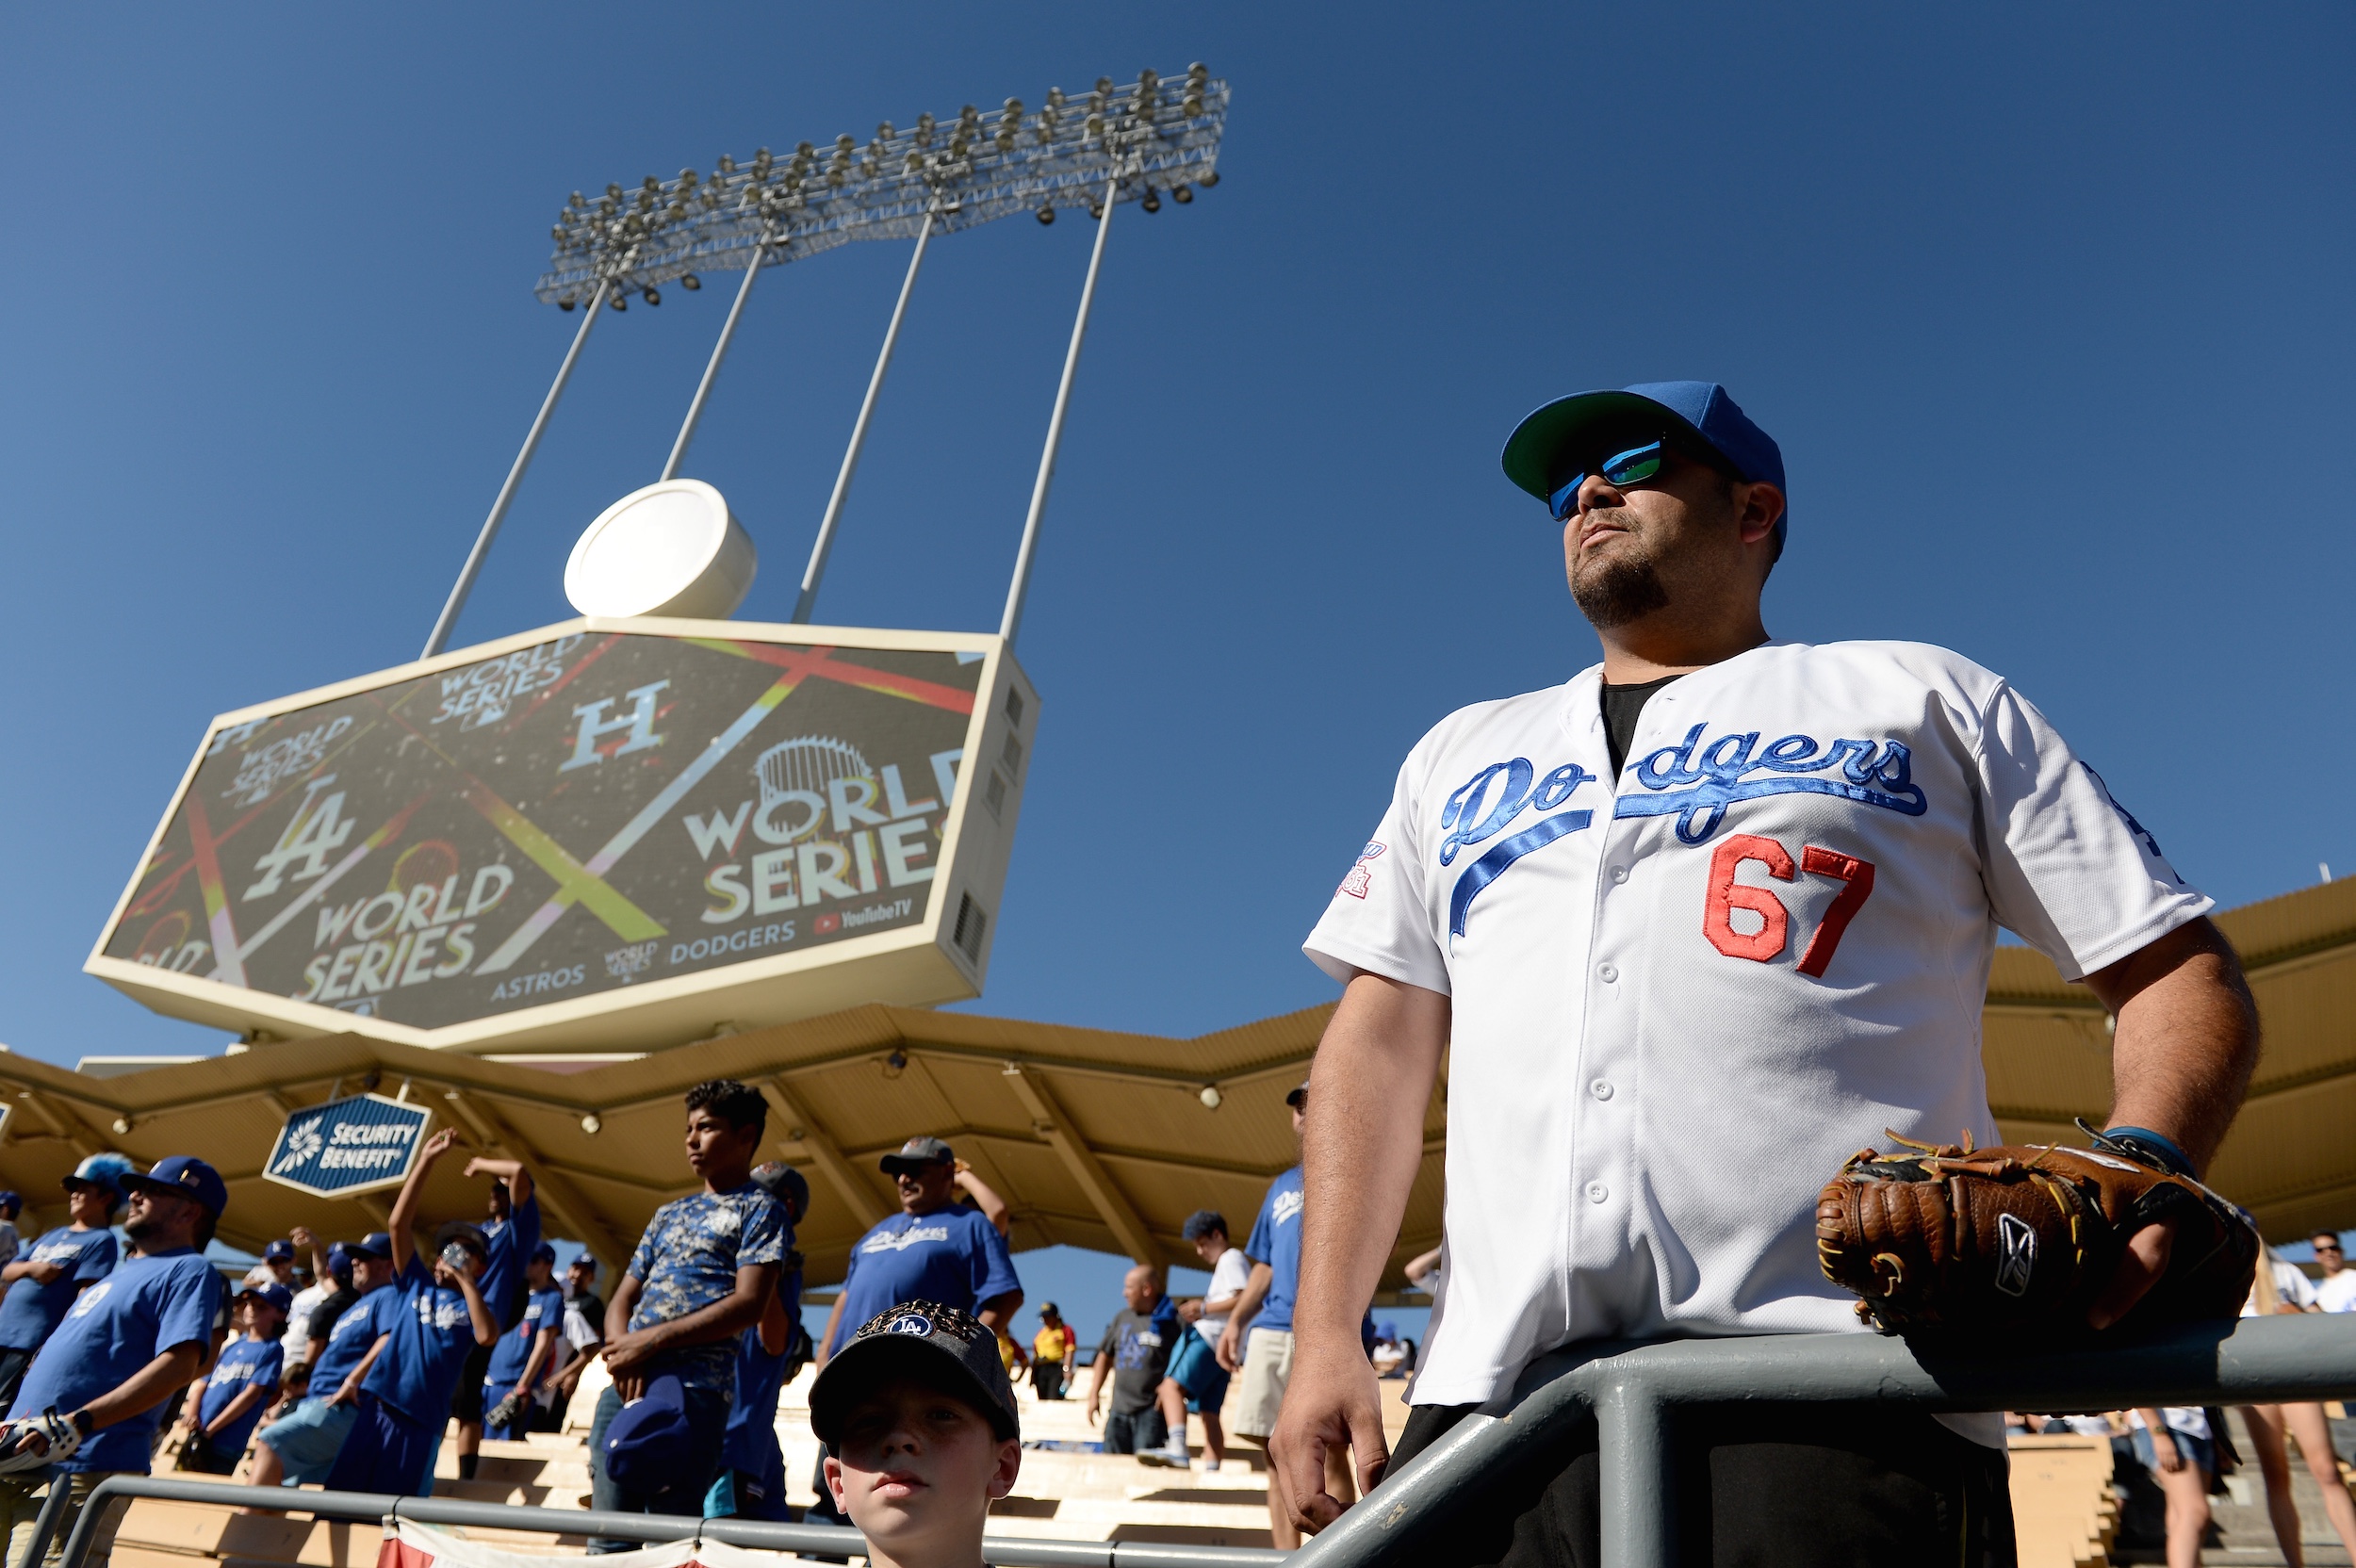 7 Things You'll Only Relate to If You're a Diehard Los Angeles Dodgers Fan